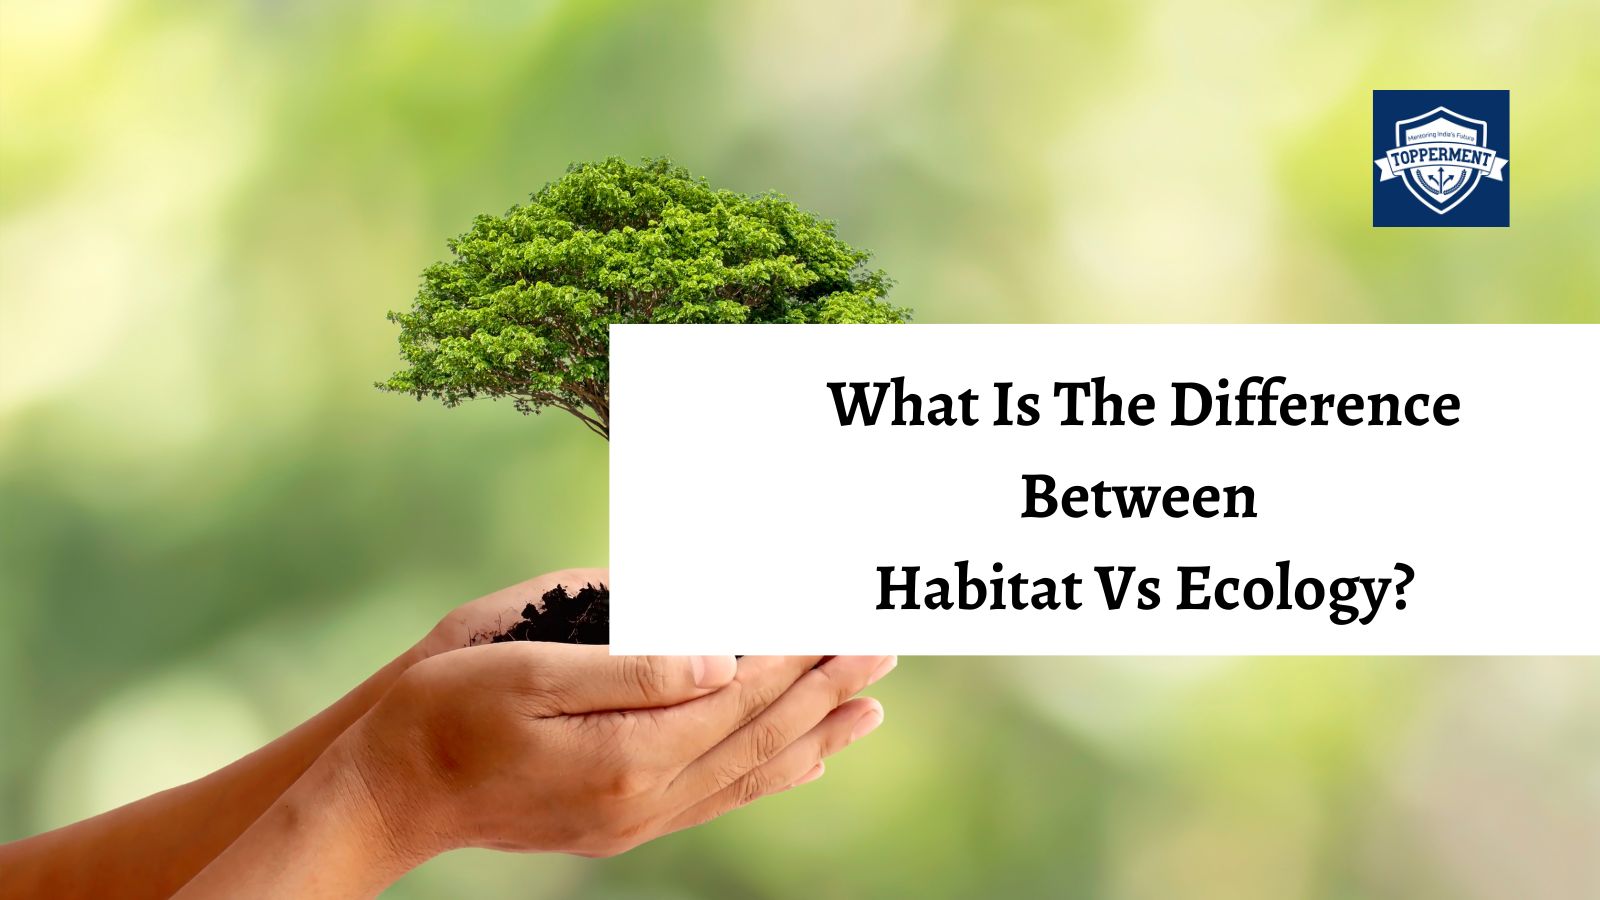 What Is The Difference Between Habitat Vs Ecology Niche? | Best UPSC IAS Coaching For Mentorship And Guidance